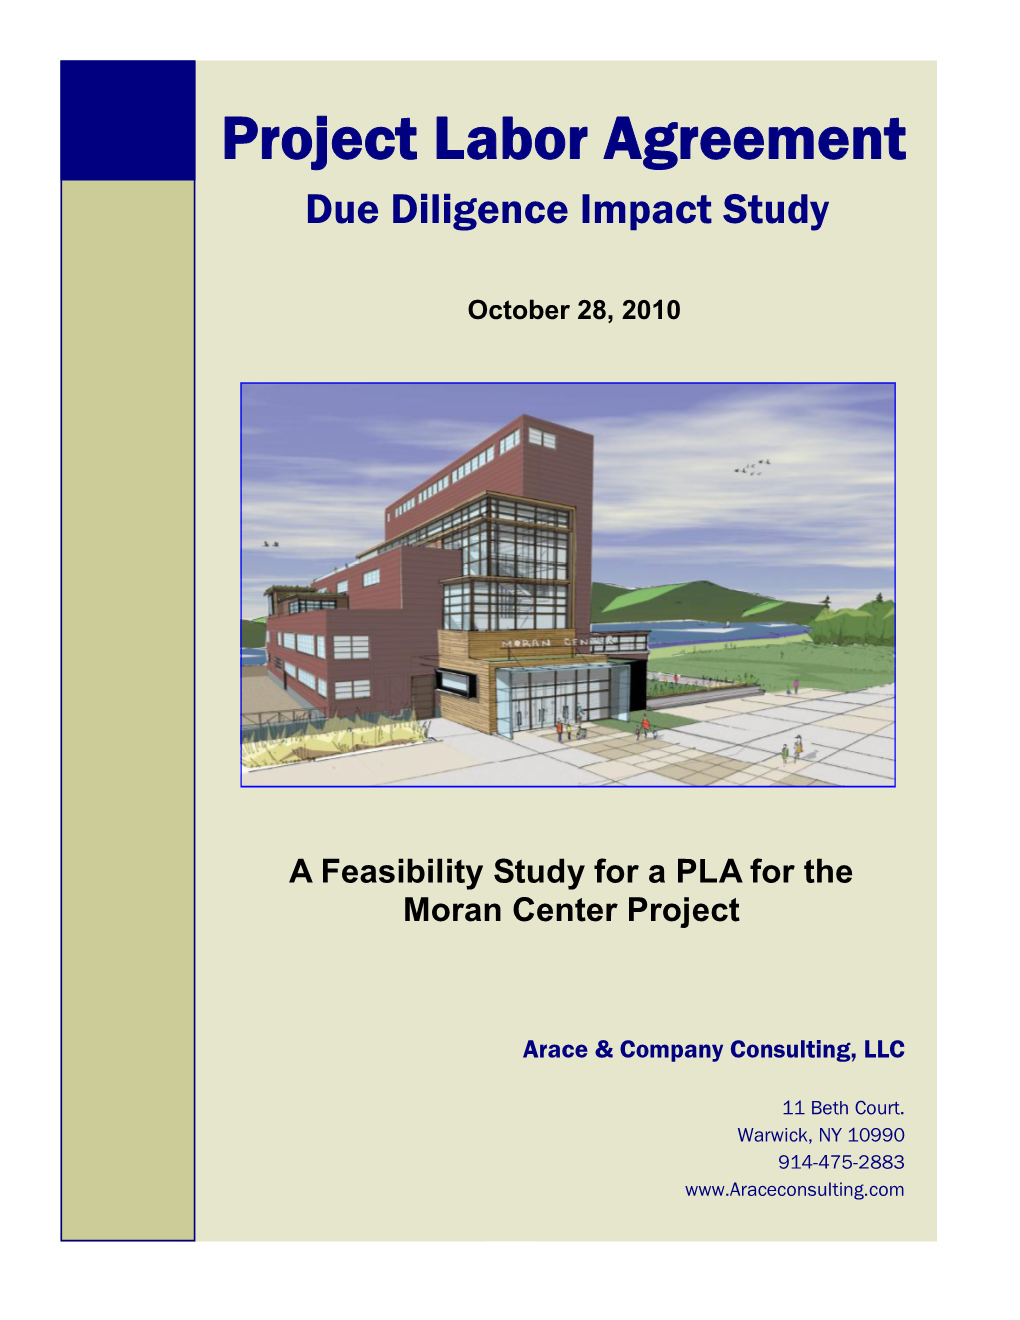 Project Labor Agreement Due Diligence Impact Study